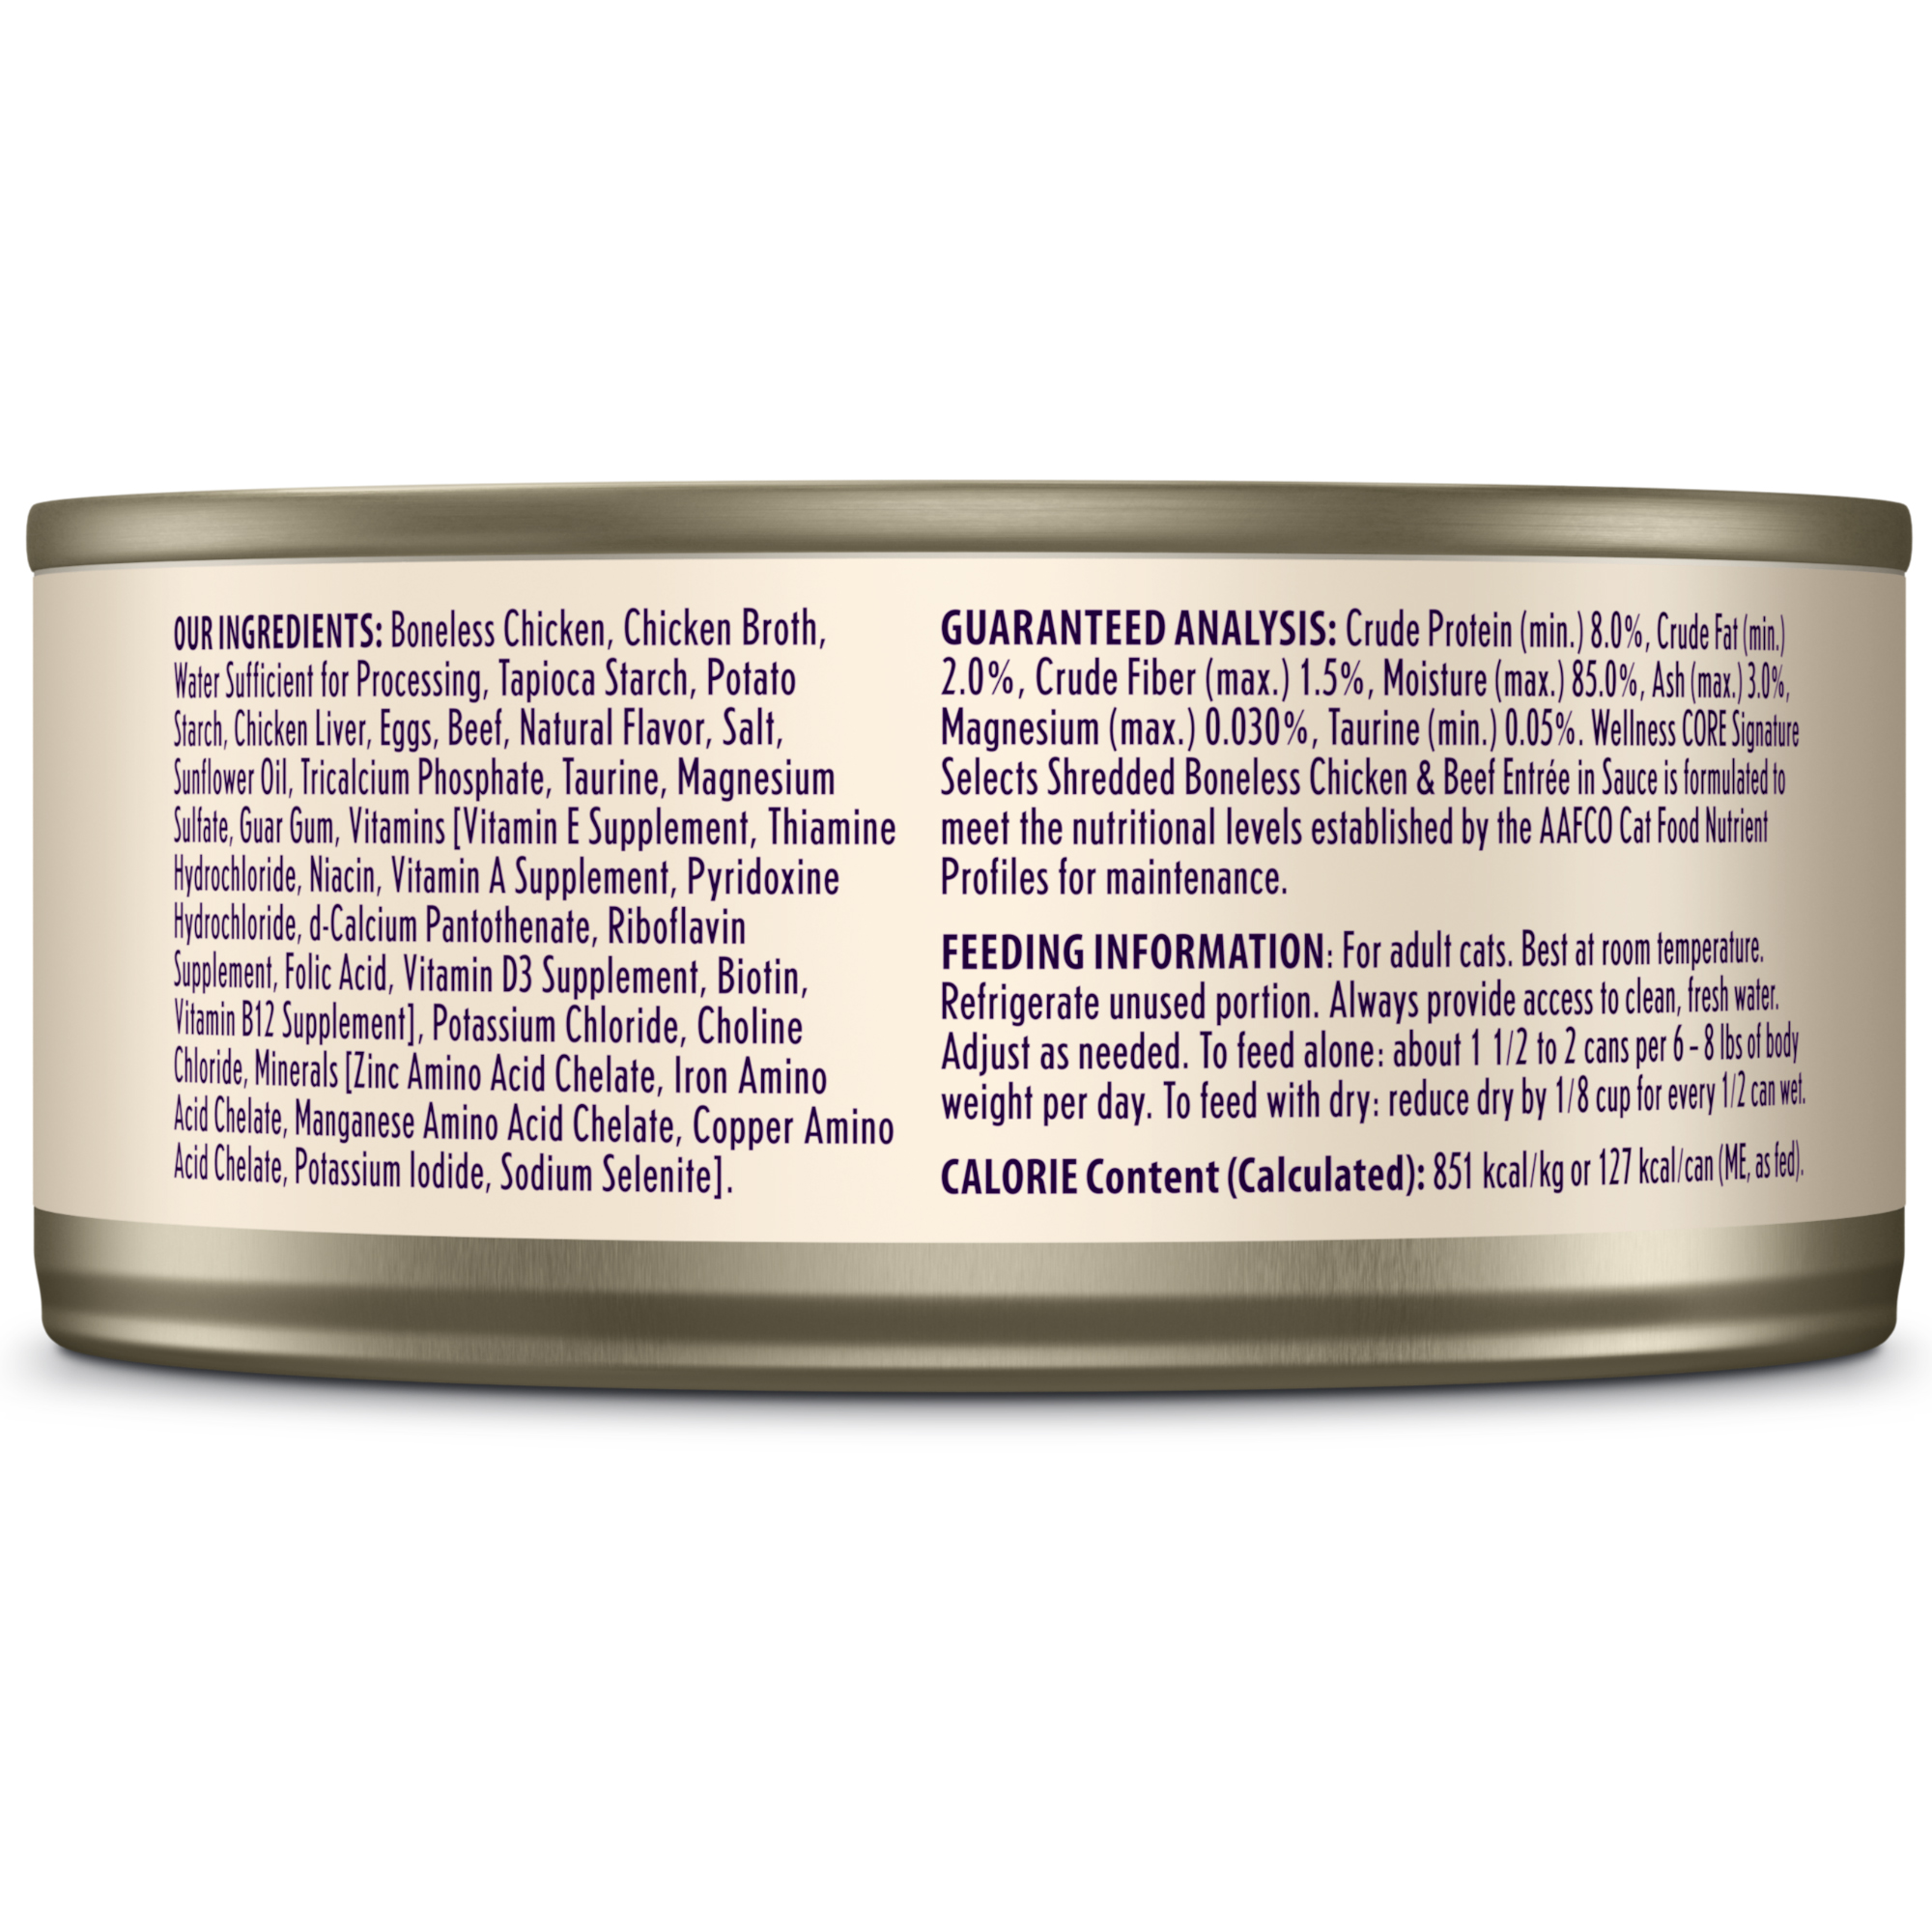 Wellness CORE Signature Selects Wet Cat Food, Shredded Chicken & Beef Entree in Sauce, 5.3oz (Pack of 12) - image 2 of 10